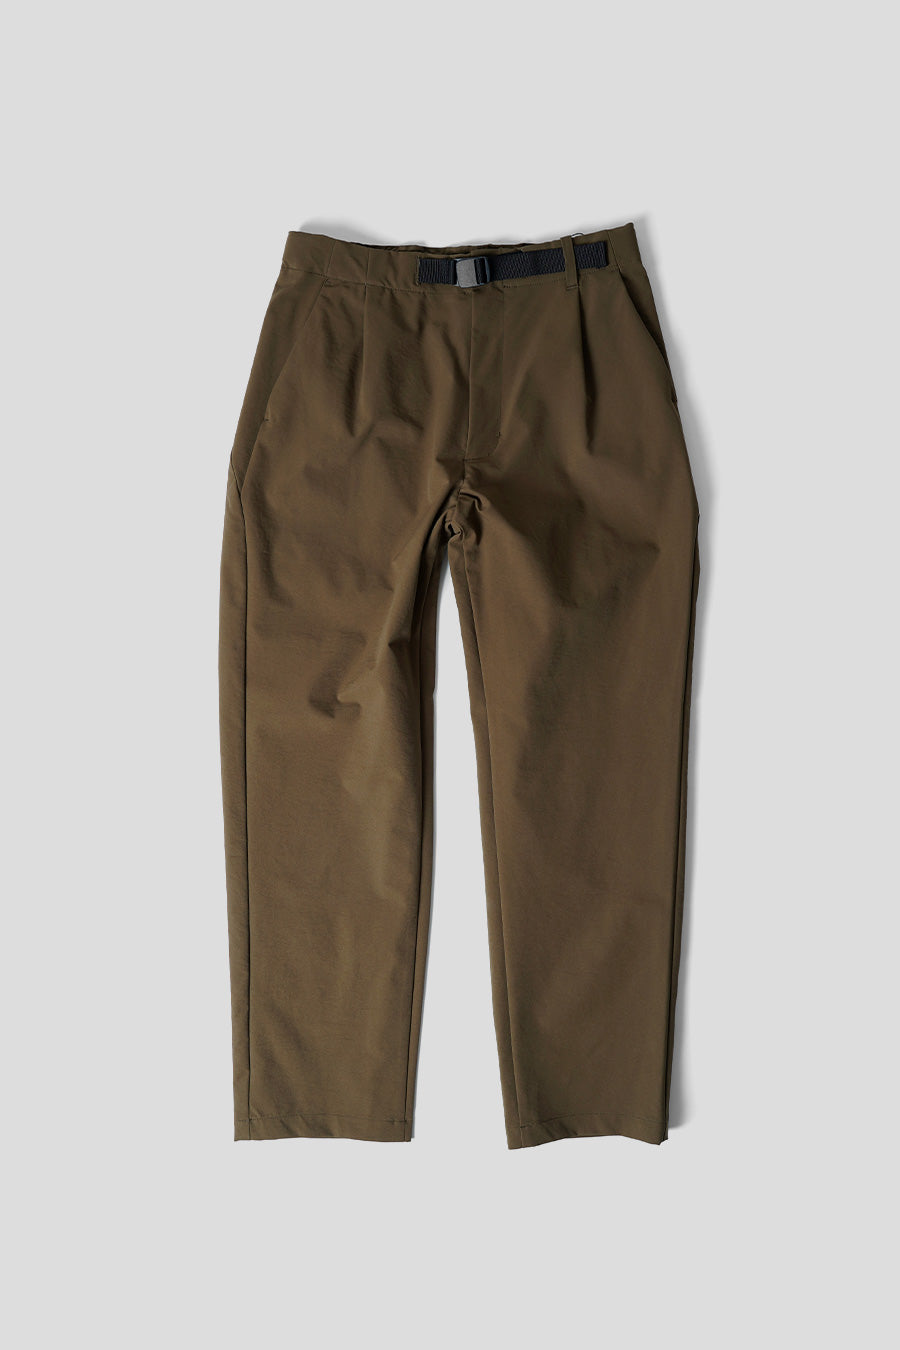 GOLDWIN - TAUPE BROWN TAPERED STRETCH TROUSERS